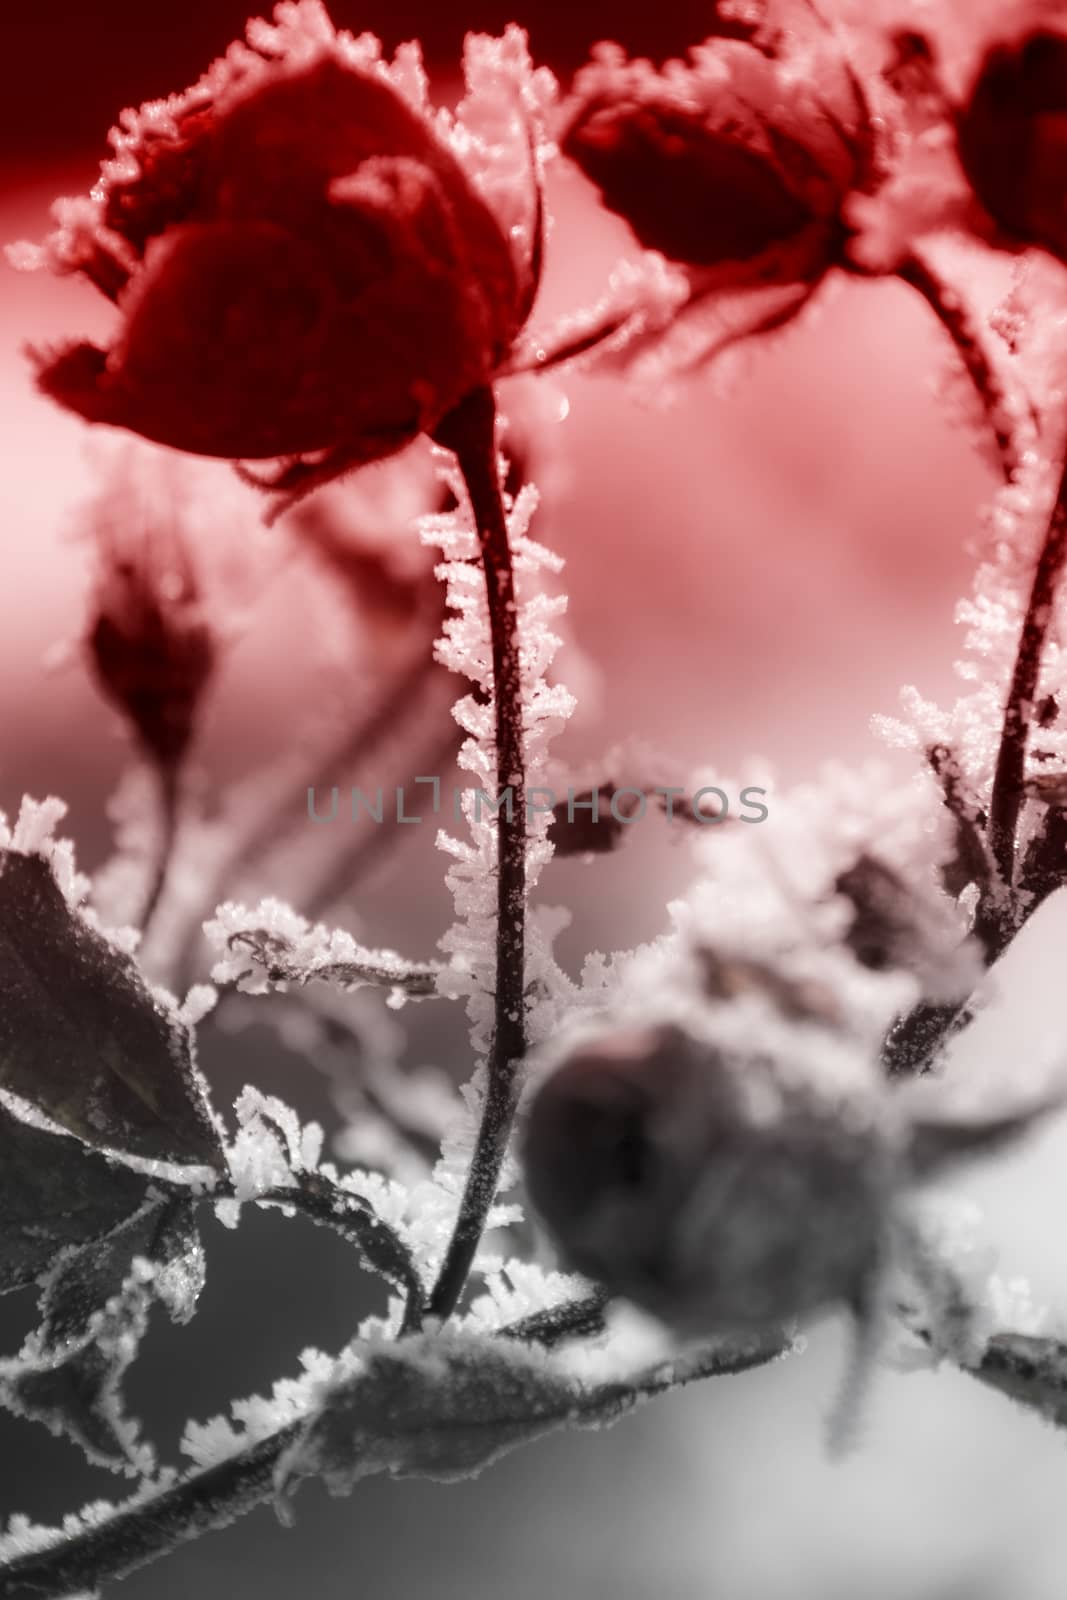 Ice Rose by Fr@nk